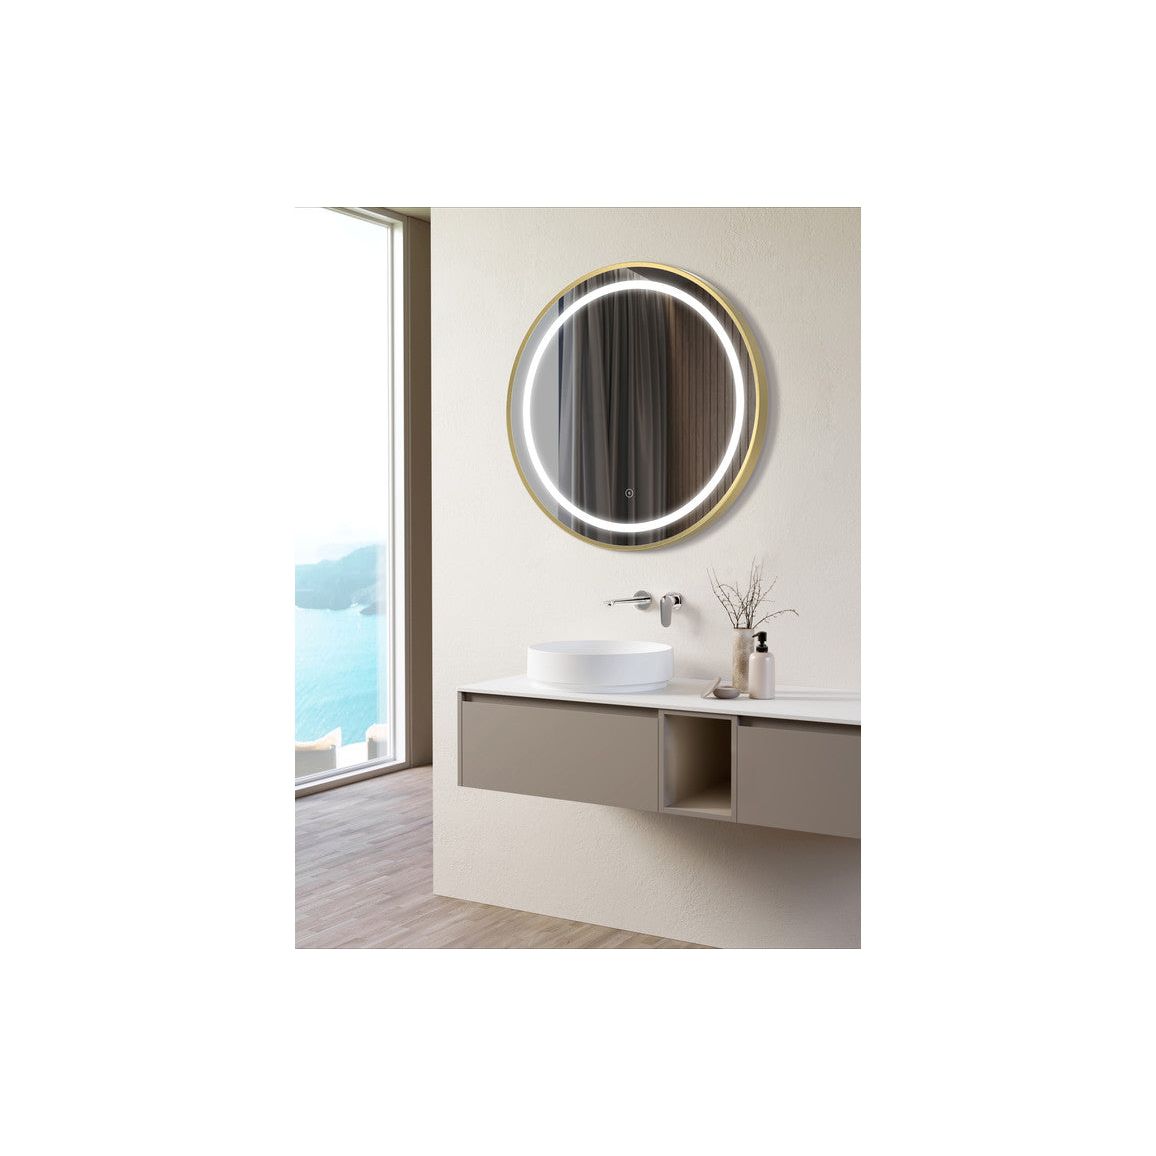 Rhine 600mm Round Front-Lit LED Mirror - Brushed Brass